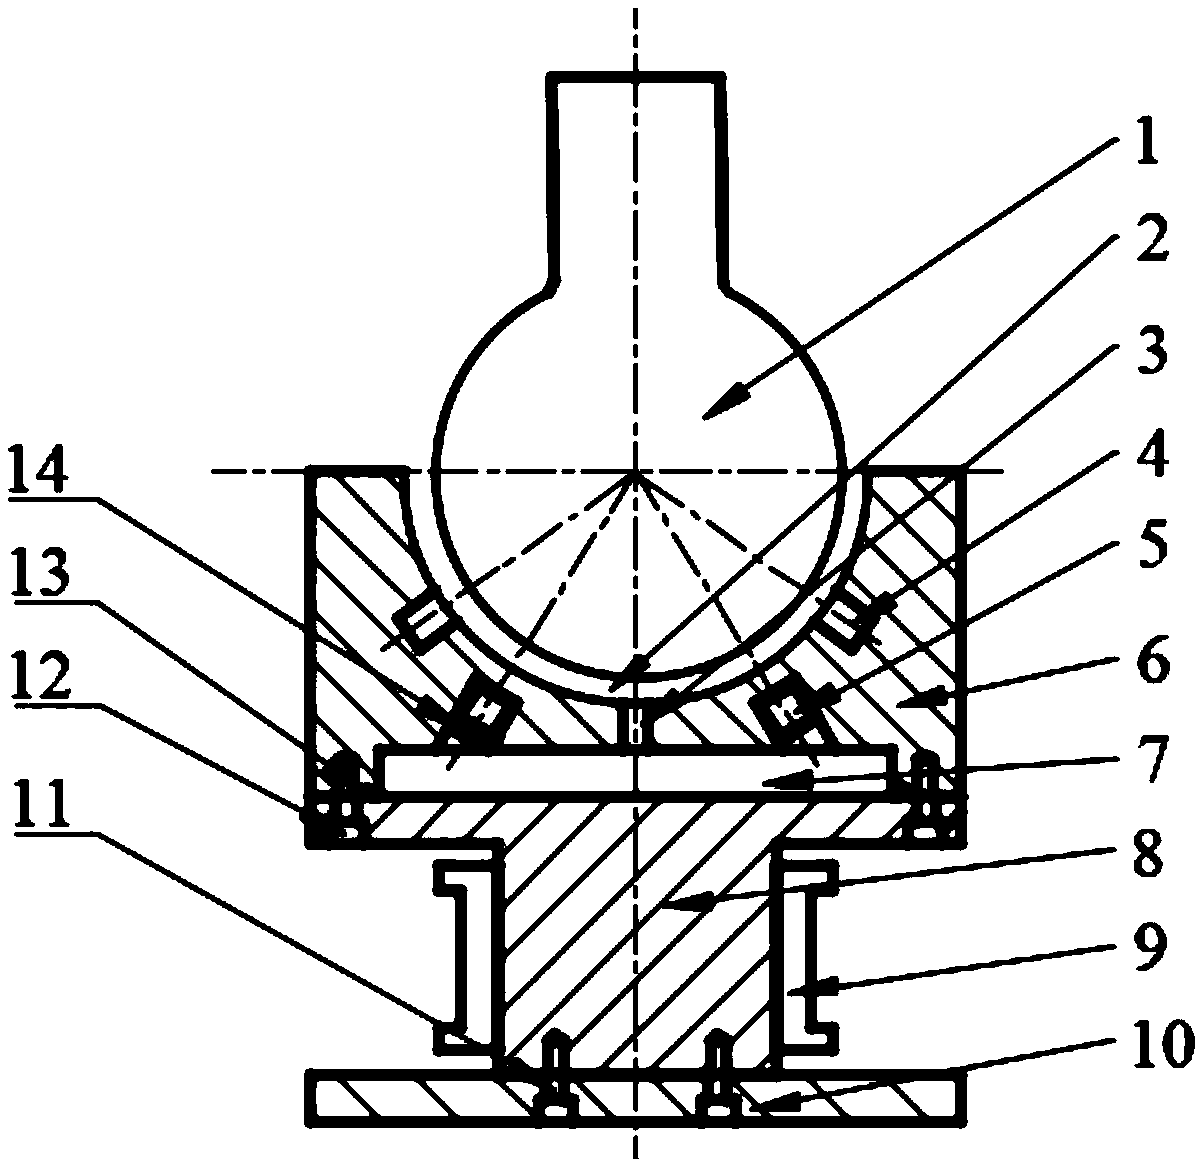 Gas magnet mixed ball hinge joint and assembly method in use